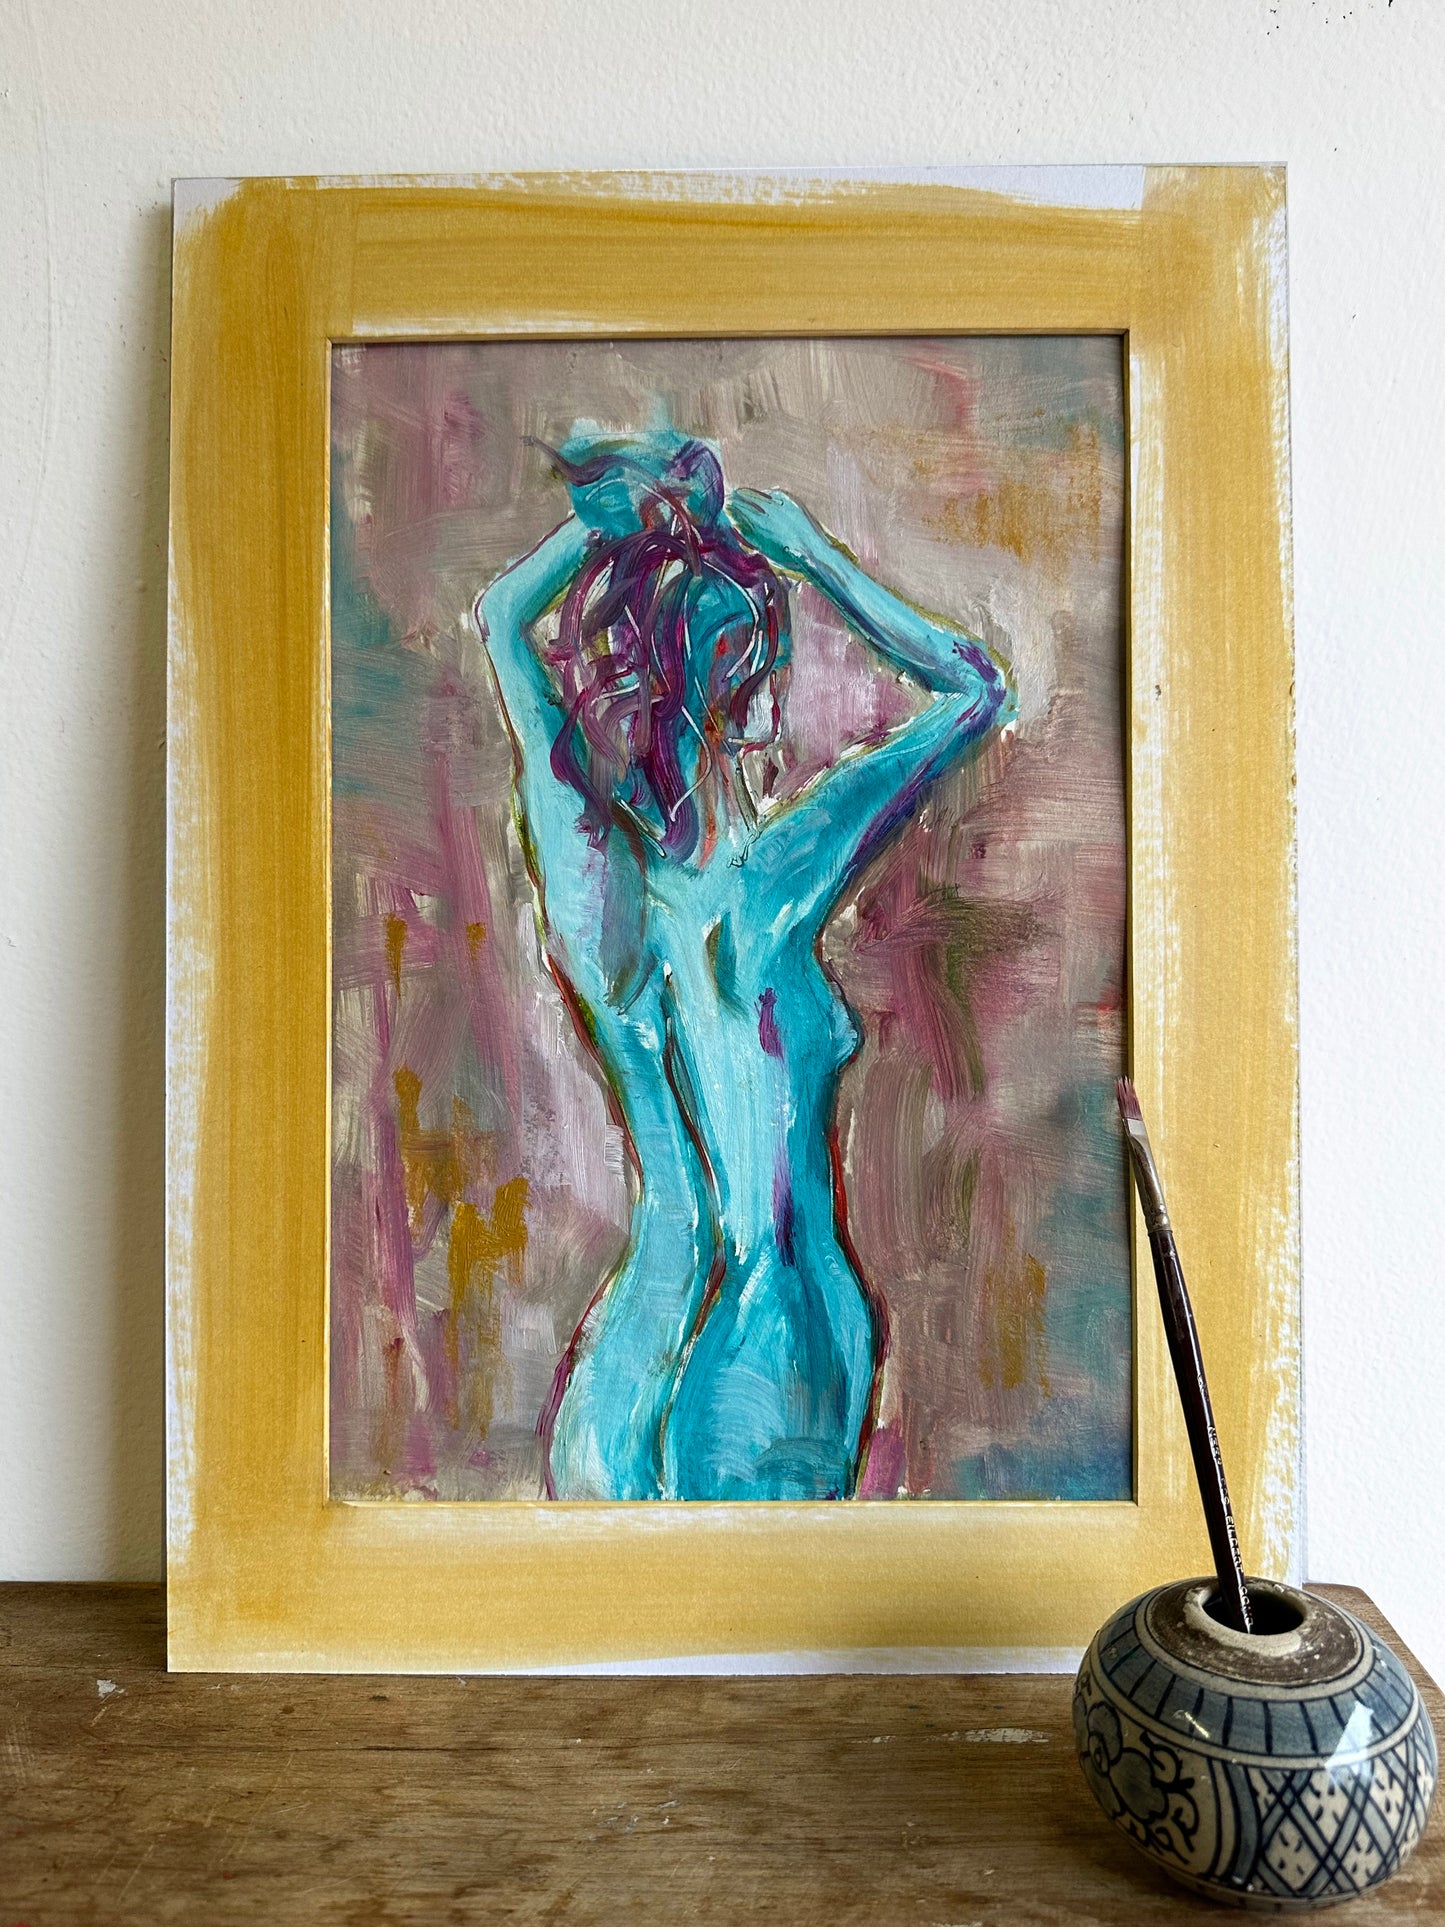 Nude study in Turquoise #1